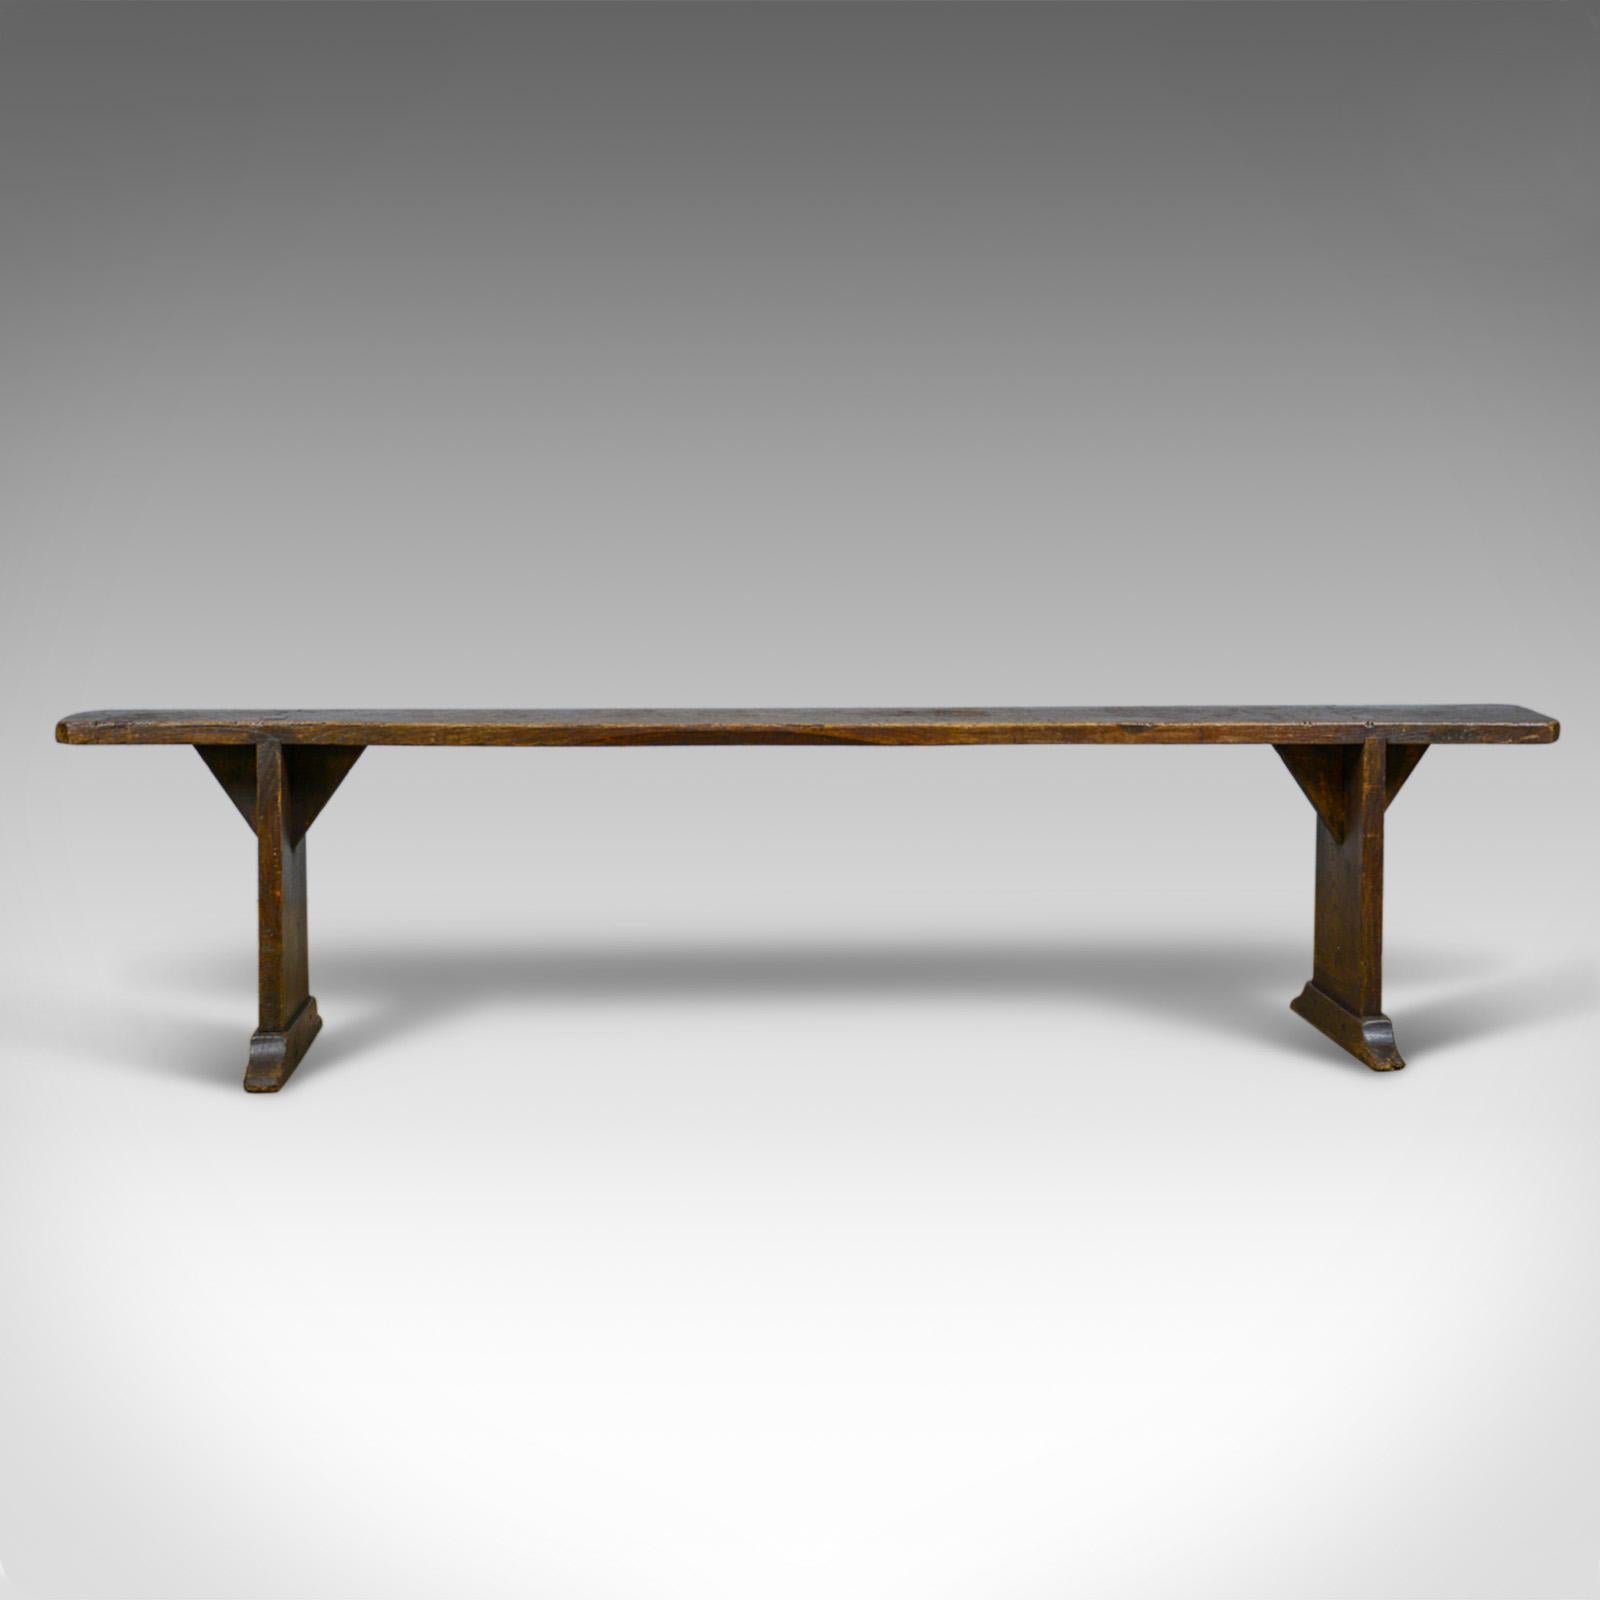 Pair of Antique Benches, Victorian, English, Forms, Oak, Kitchen Dining (19. Jahrhundert)